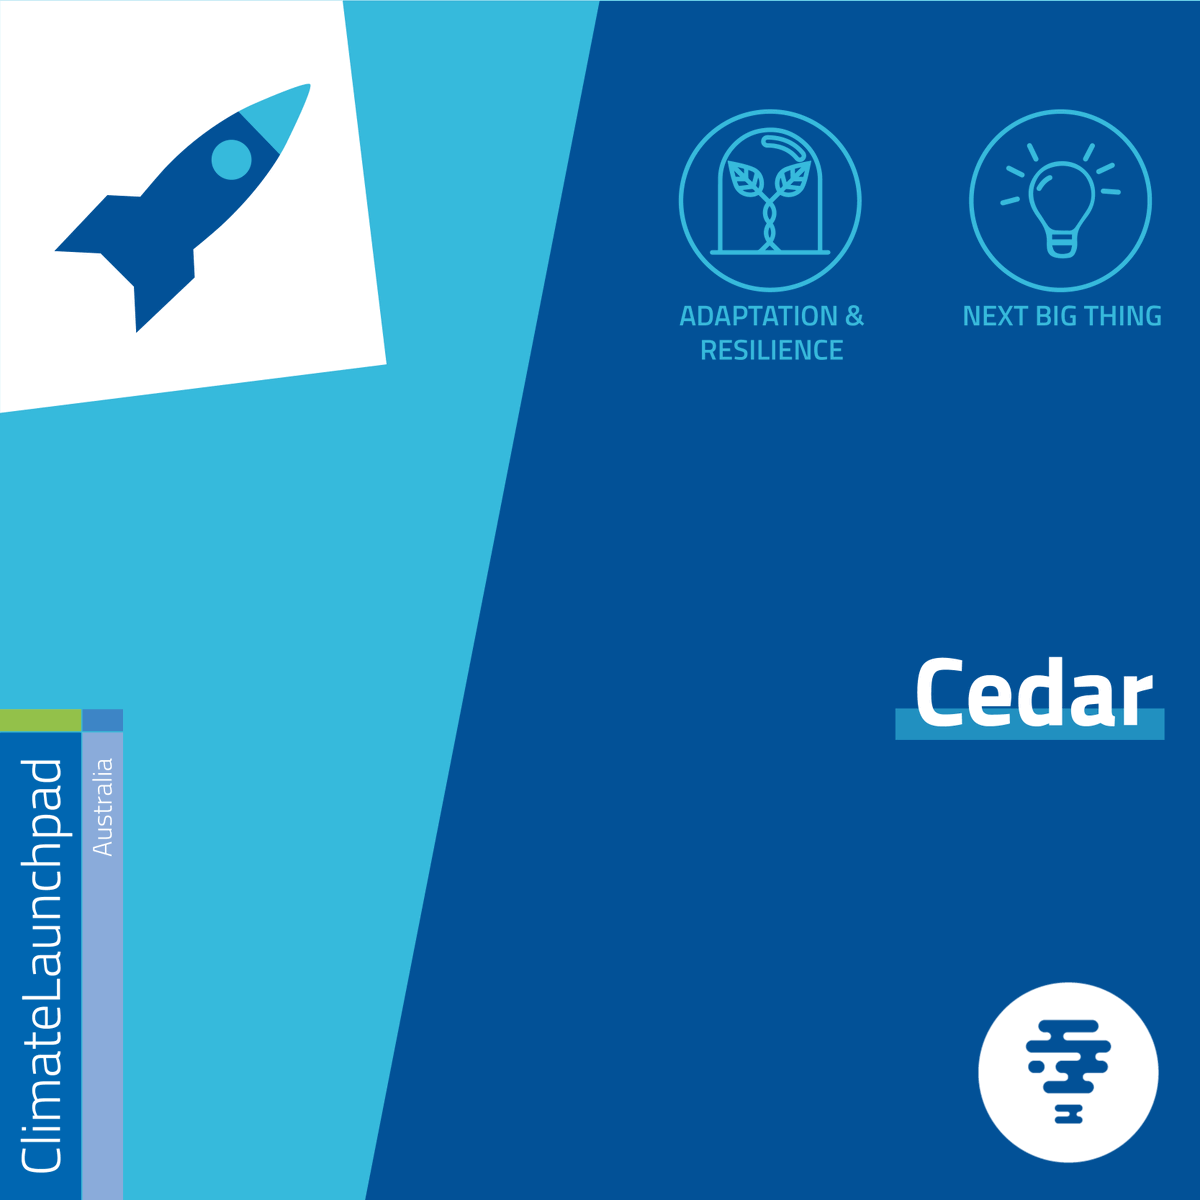 We are delighted to introduce our @ClimateLaunch 2023 Australian Finalists! Cedar is a climate emissions data and reporting platform for companies to view the carbon emissions within their supply chains. Watch our #CLP23 National Finals @ NEXUS! victoriancleantech.org.au/nexus